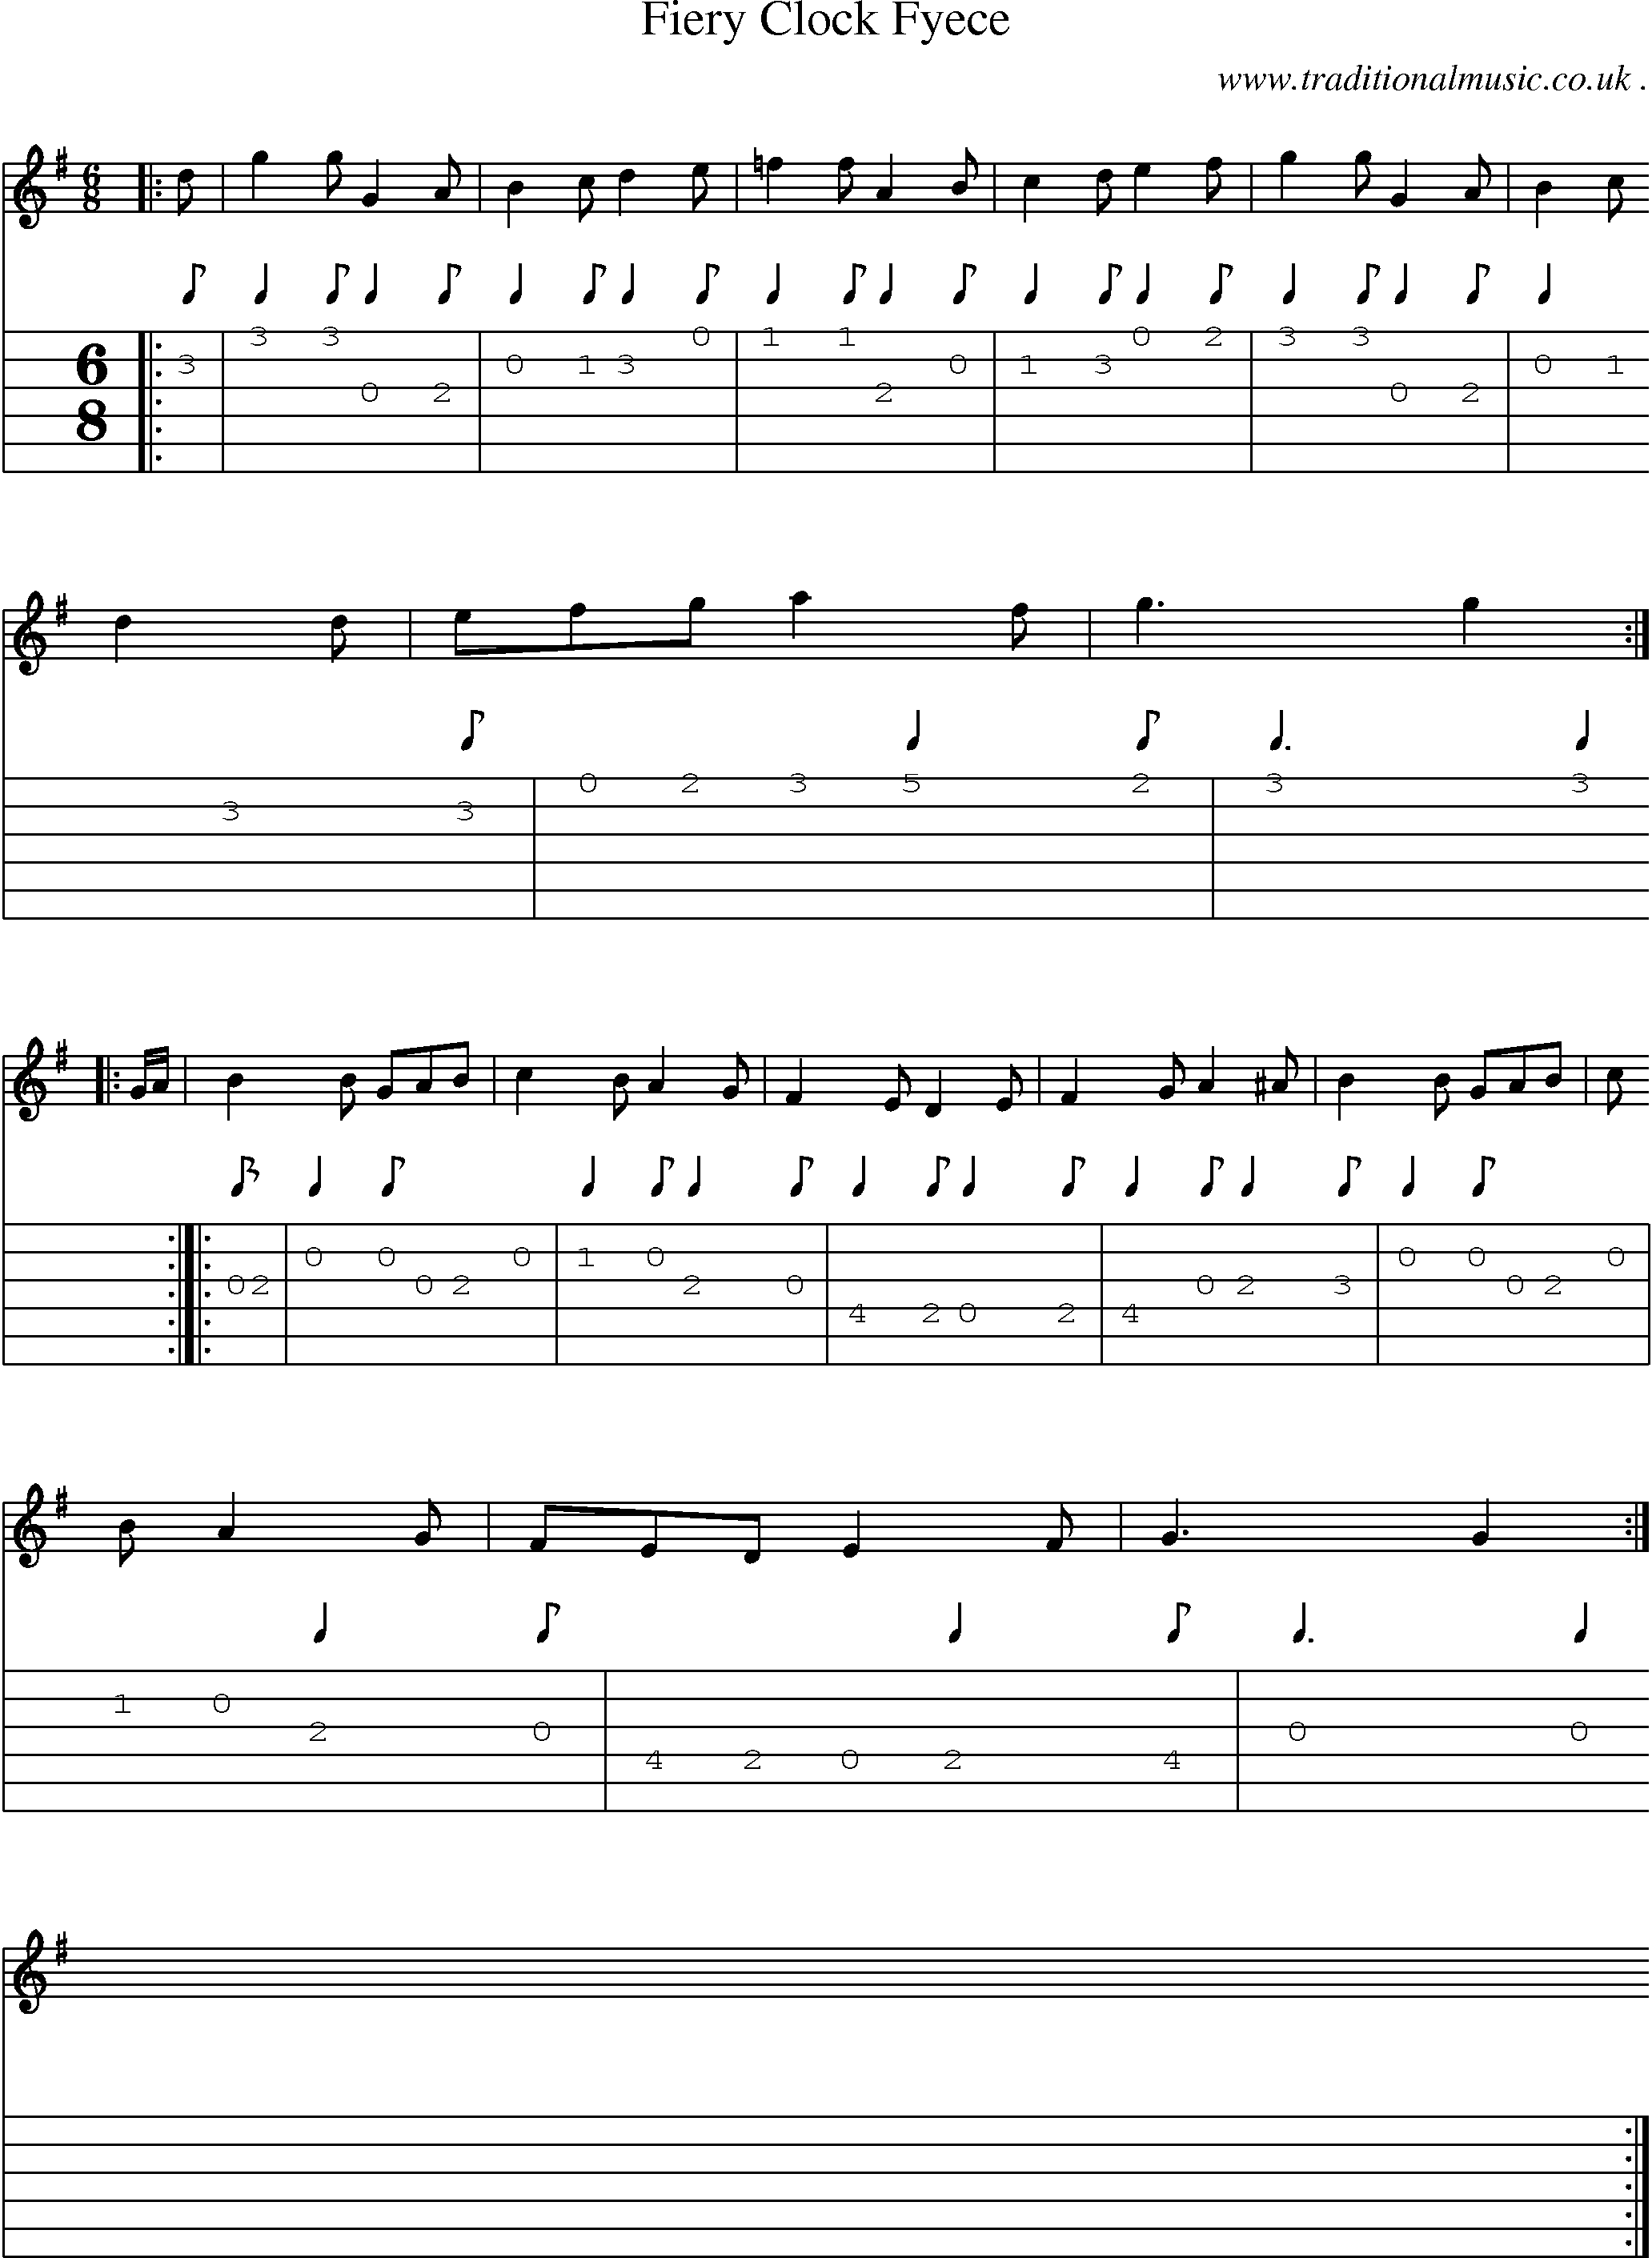 Sheet-Music and Guitar Tabs for Fiery Clock Fyece